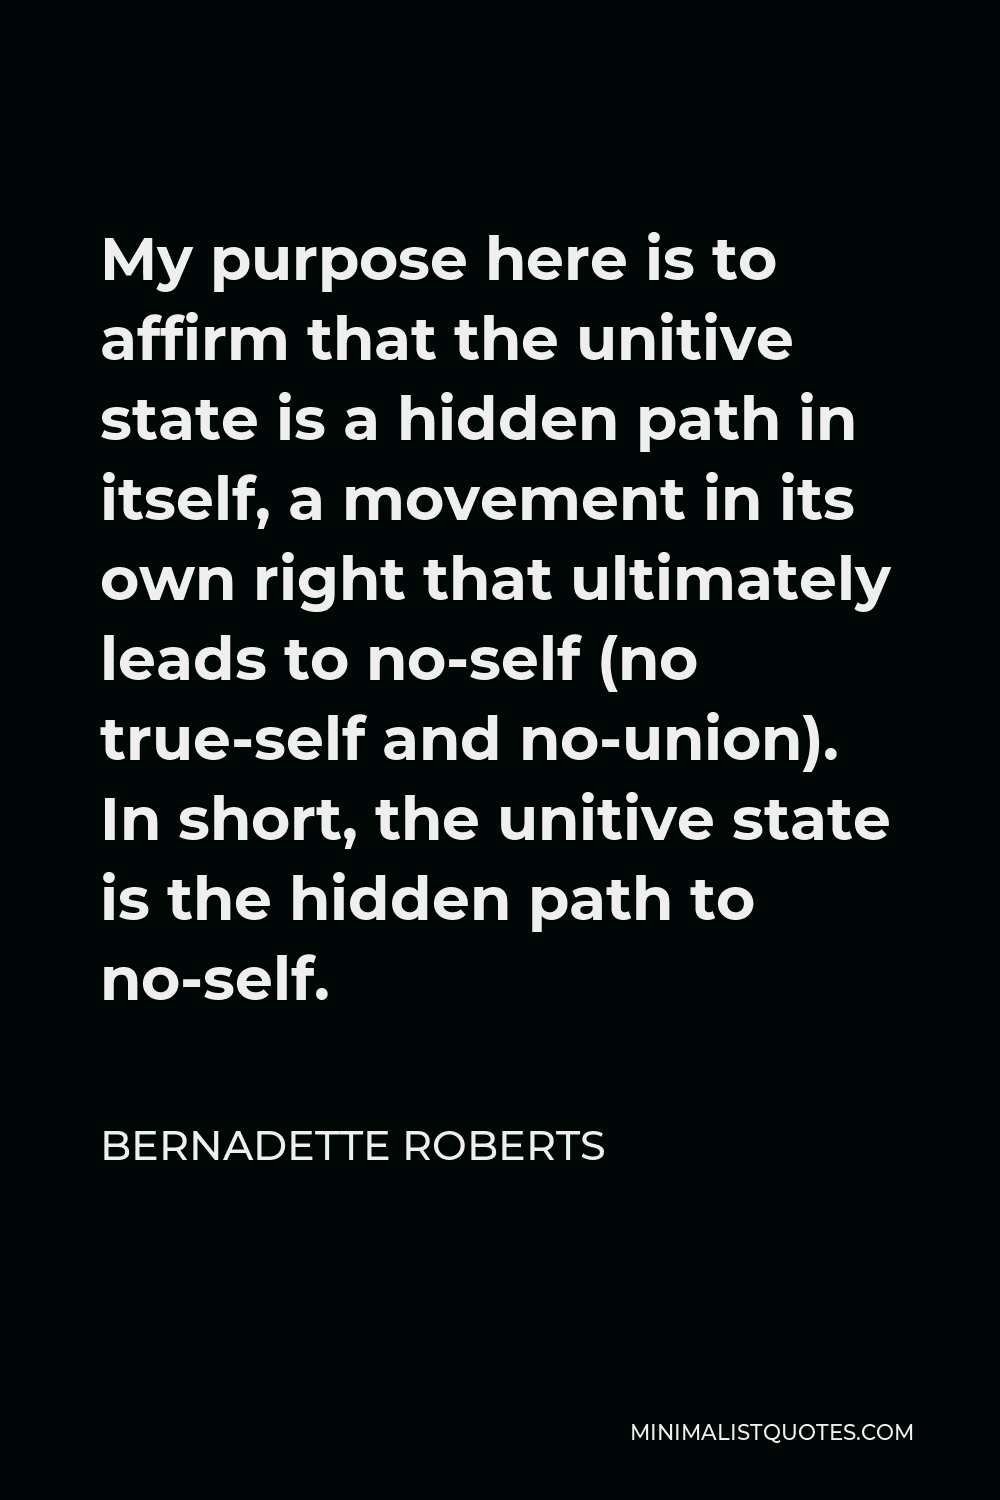 Bernadette Roberts Quote - My purpose here is to affirm that the unitive state is a hidden path in itself, a movement in its own right that ultimately leads to no-self (no true-self and no-union). In short, the unitive state is the hidden path to no-self.